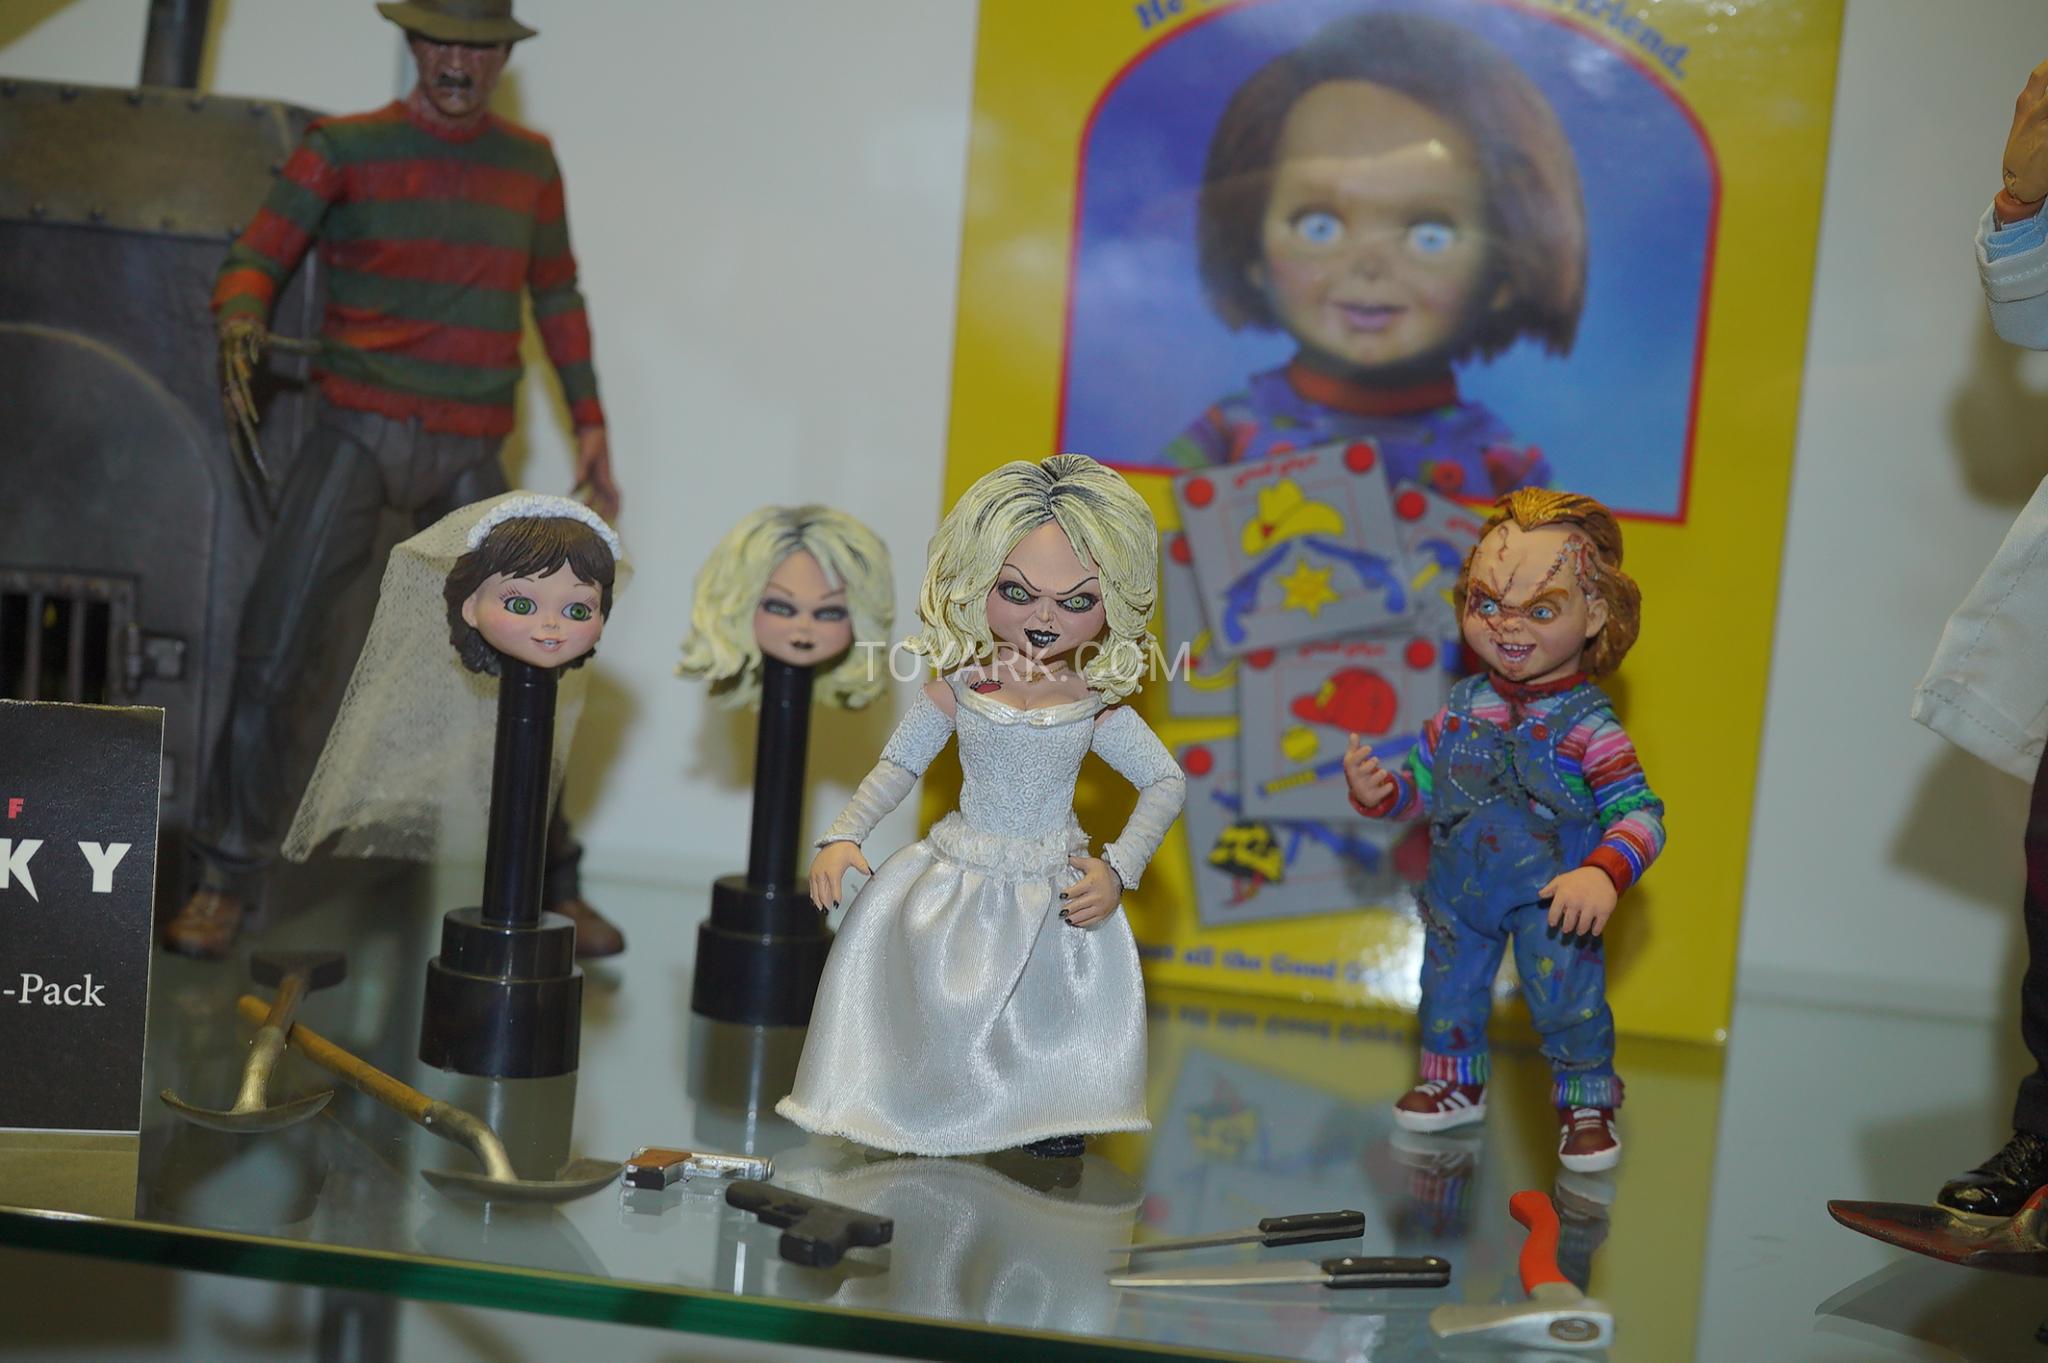 bride of chucky 2 pack